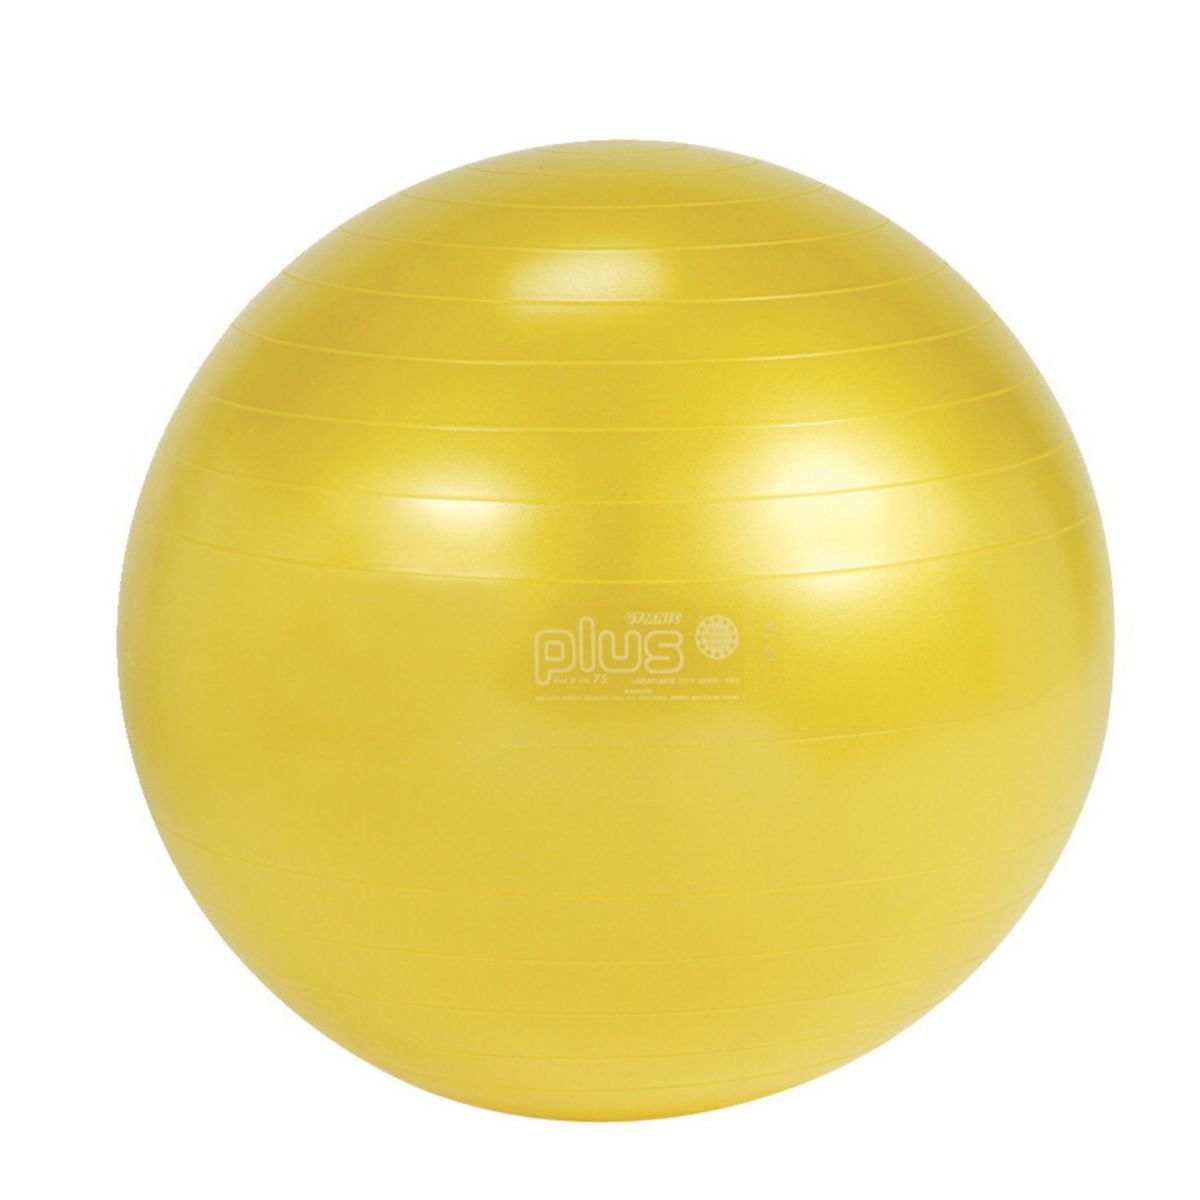 75 cm Super Pro Anti-Burst Therapy Ball, Yellow Road2Recovery